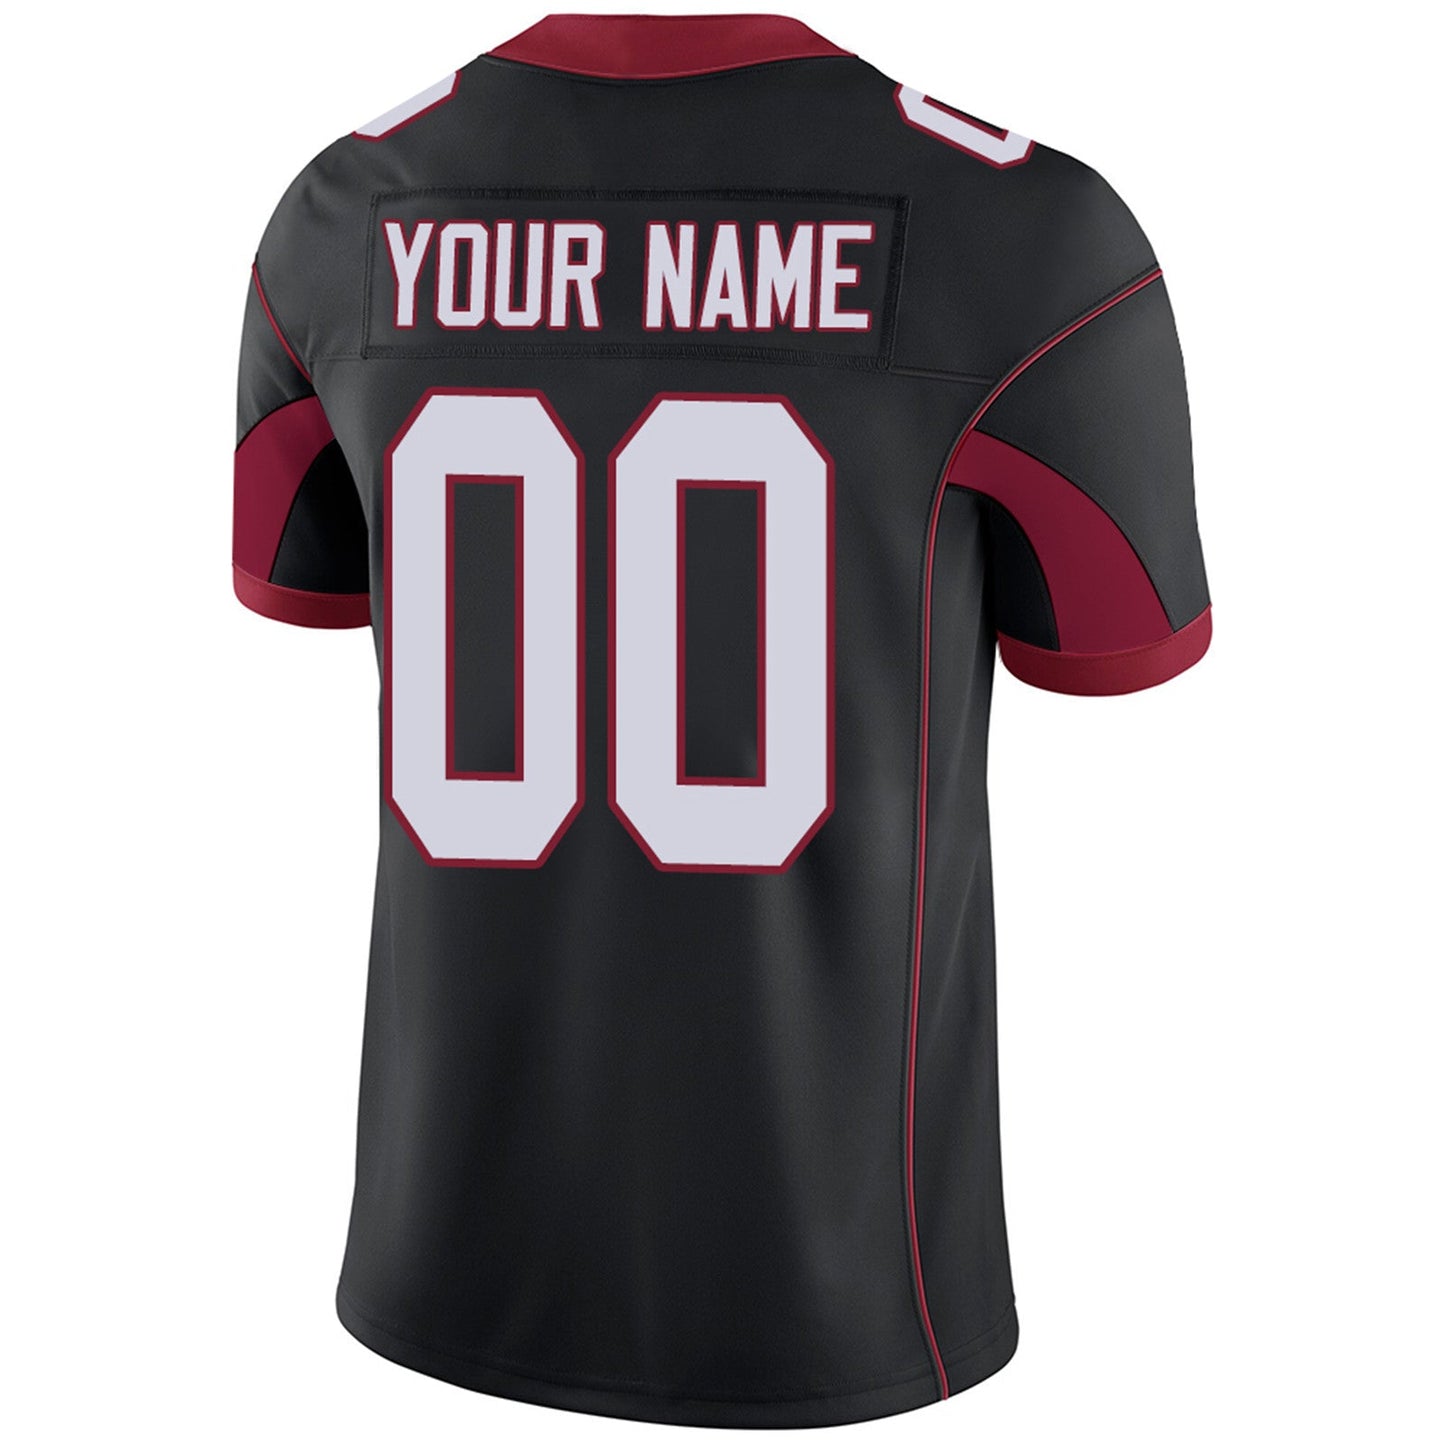 Custom A.Cardinals Team Player or Personalized Design Your Own Name for Men's Women's Youth Jerseys Red Football Jerseys